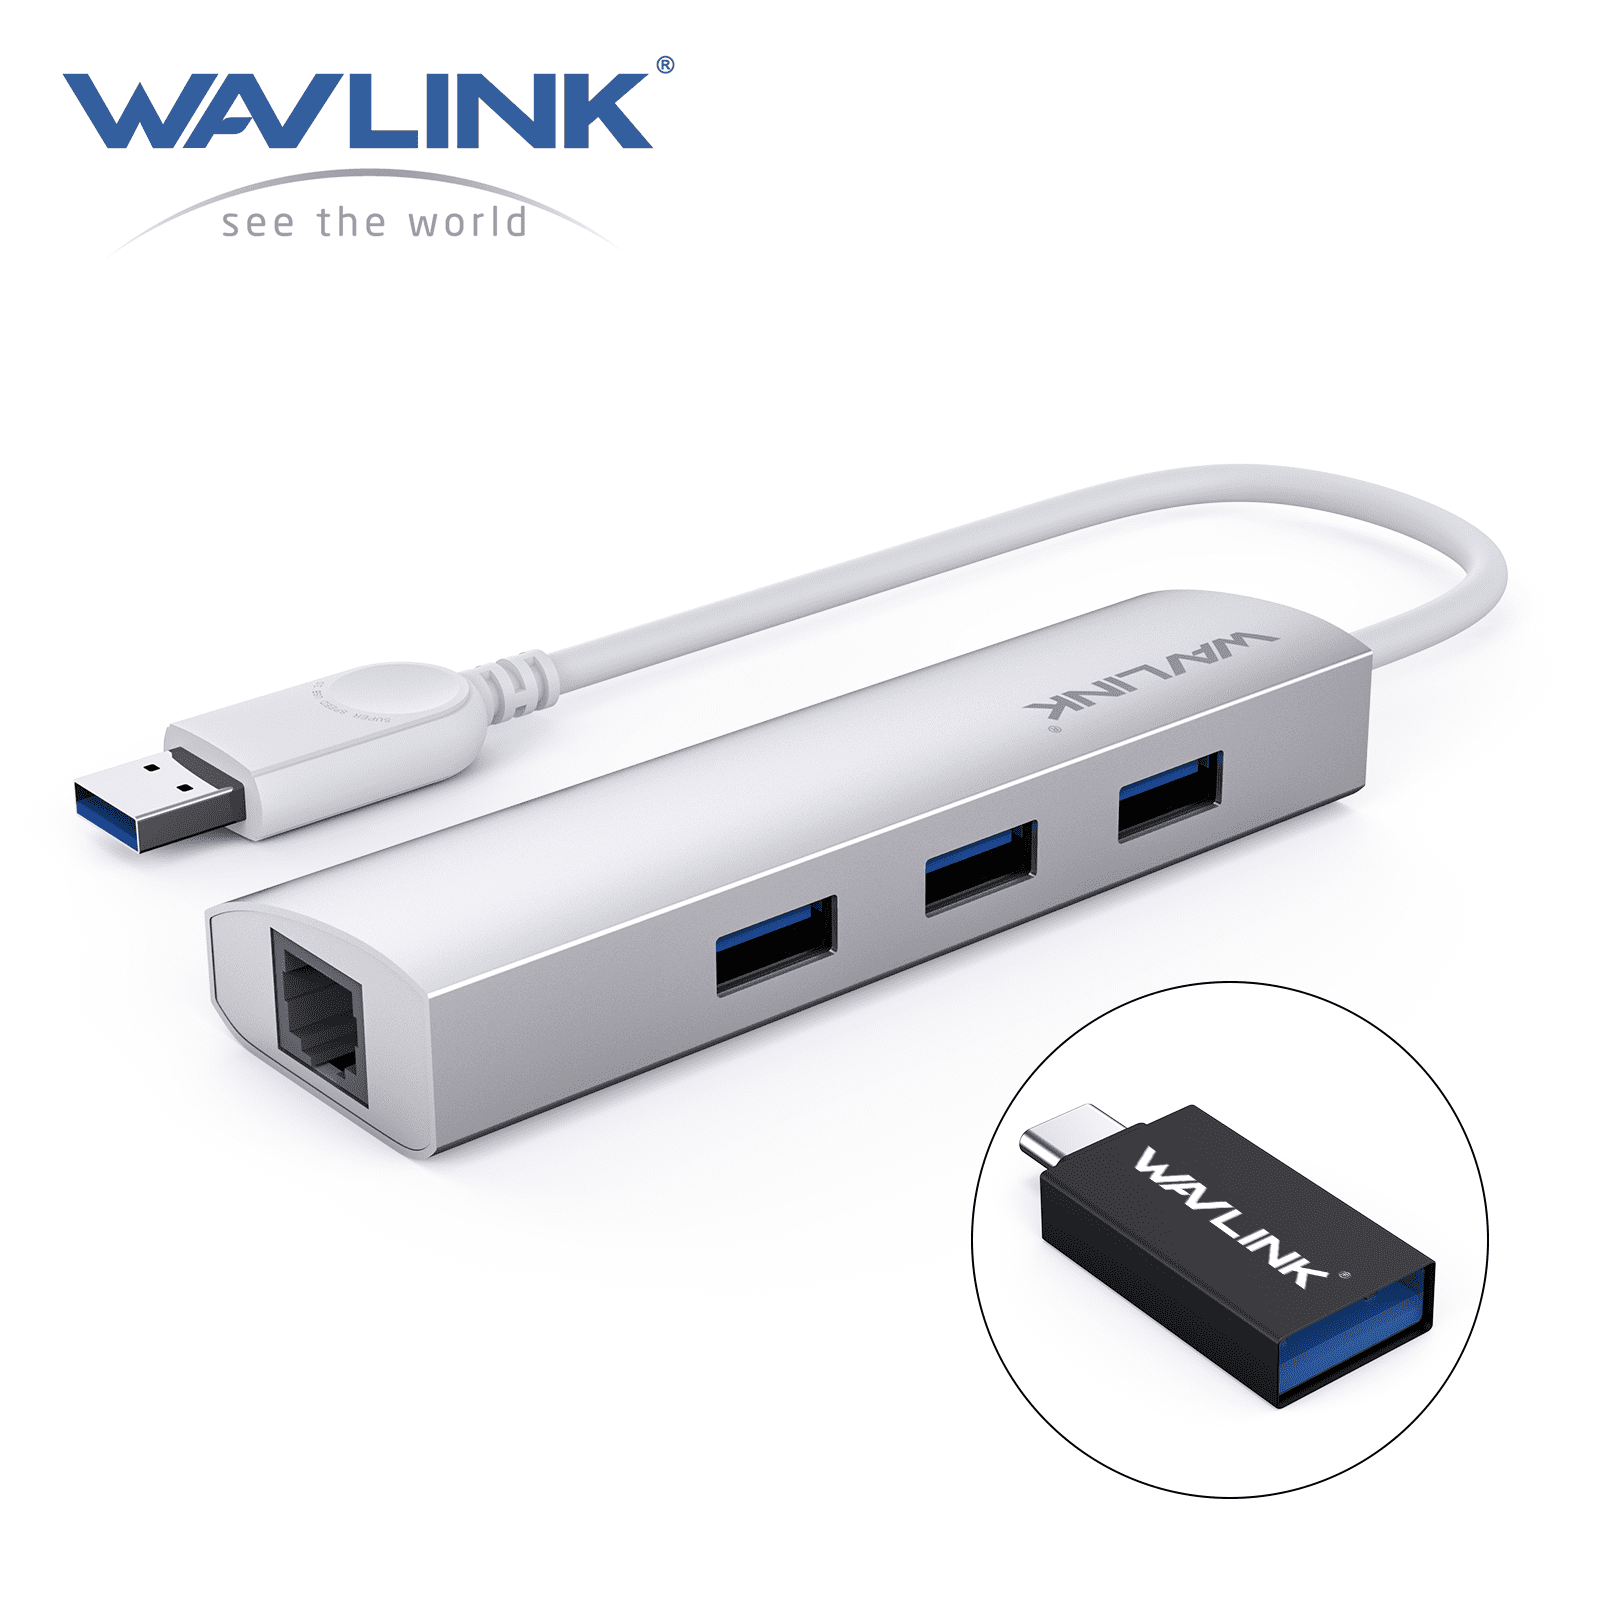 USB 3.0 to Ethernet Adapter, 3-Port USB 3.0 Hub with RJ45 10/100/1000  Gigabit Ethernet Adapter Support Windows 10,8.1,Mac OS, Surface